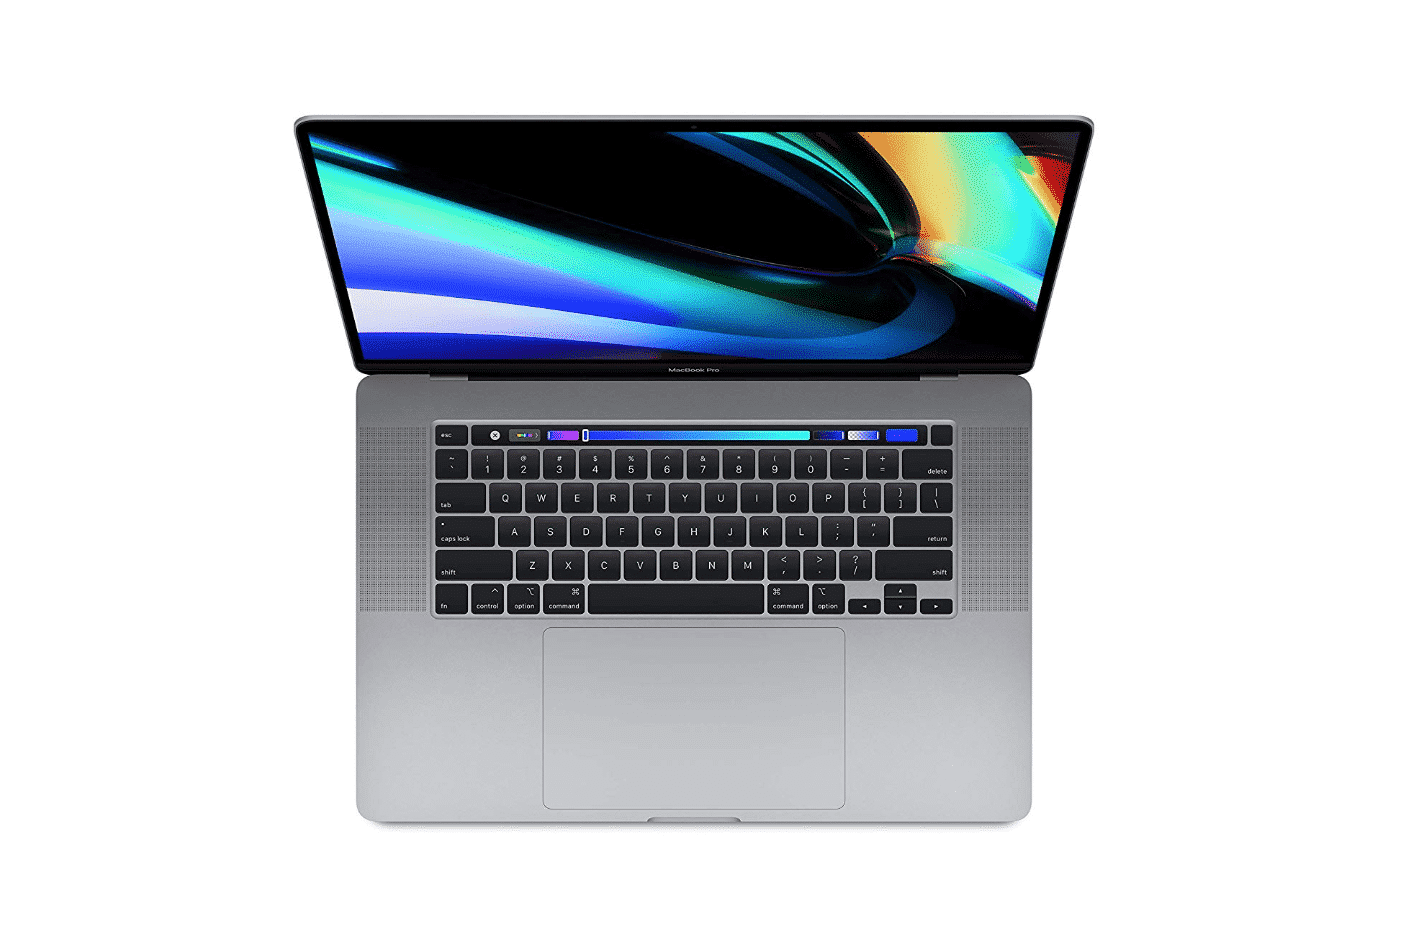 This is the new MacBook Pro for 2019 by Apple.